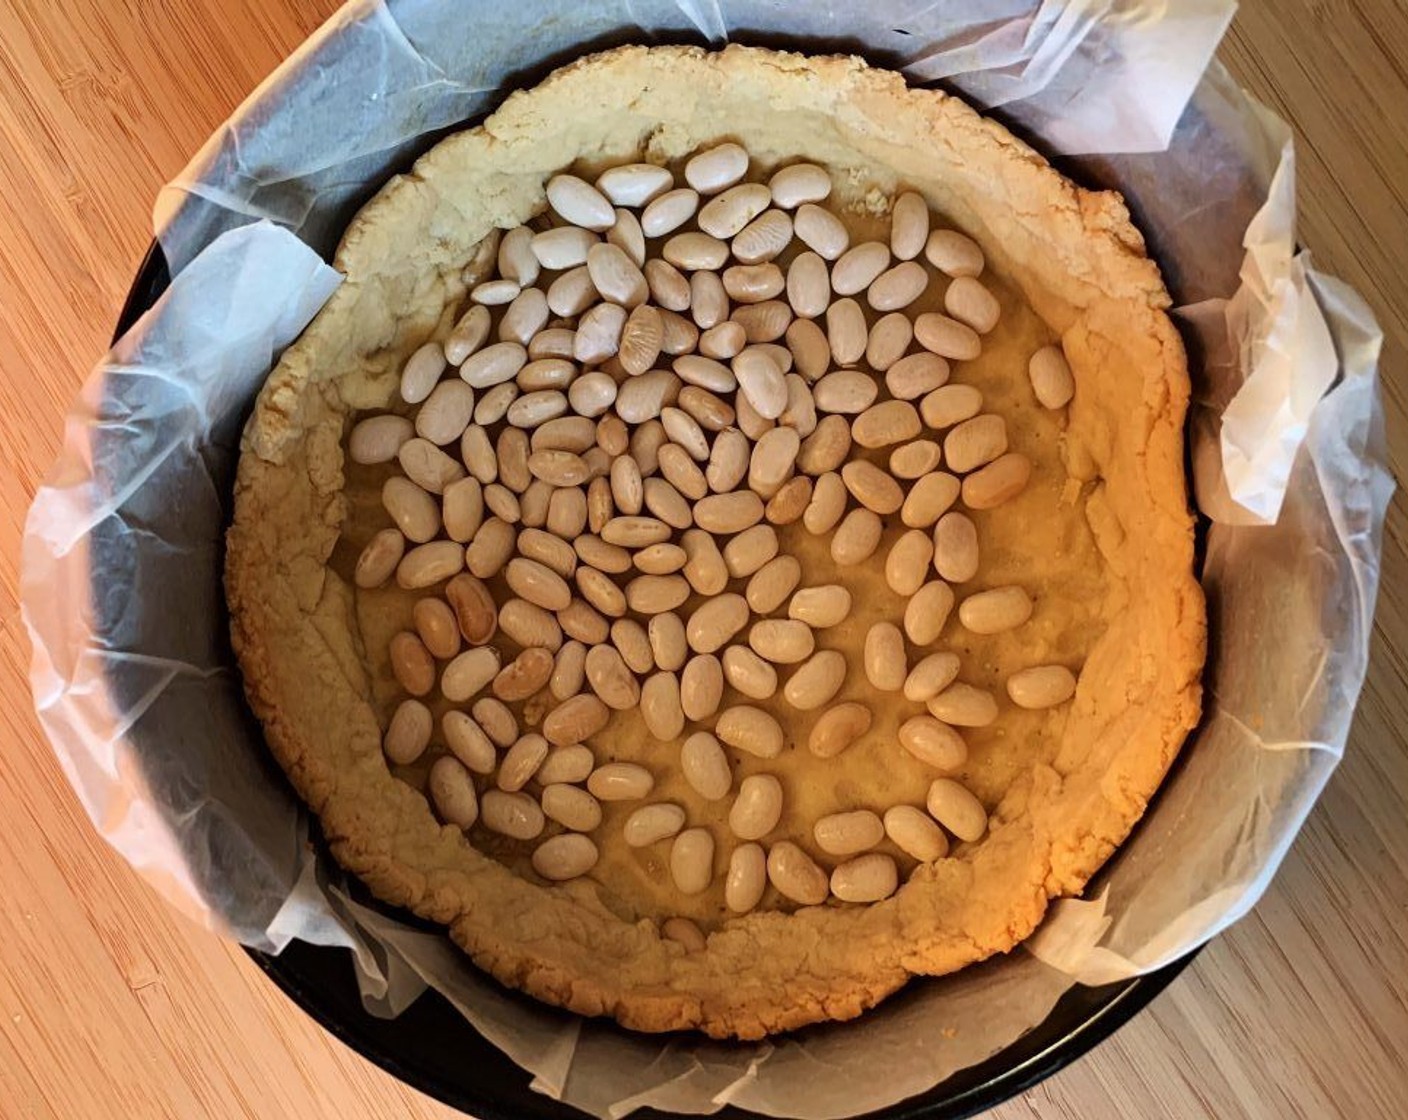 step 6 Lay the dough into a pie pan. Cover it with beans or pie weights and cook it in preheated oven for 30 to 40 minutes. Remove from the oven and let it cool down completely.